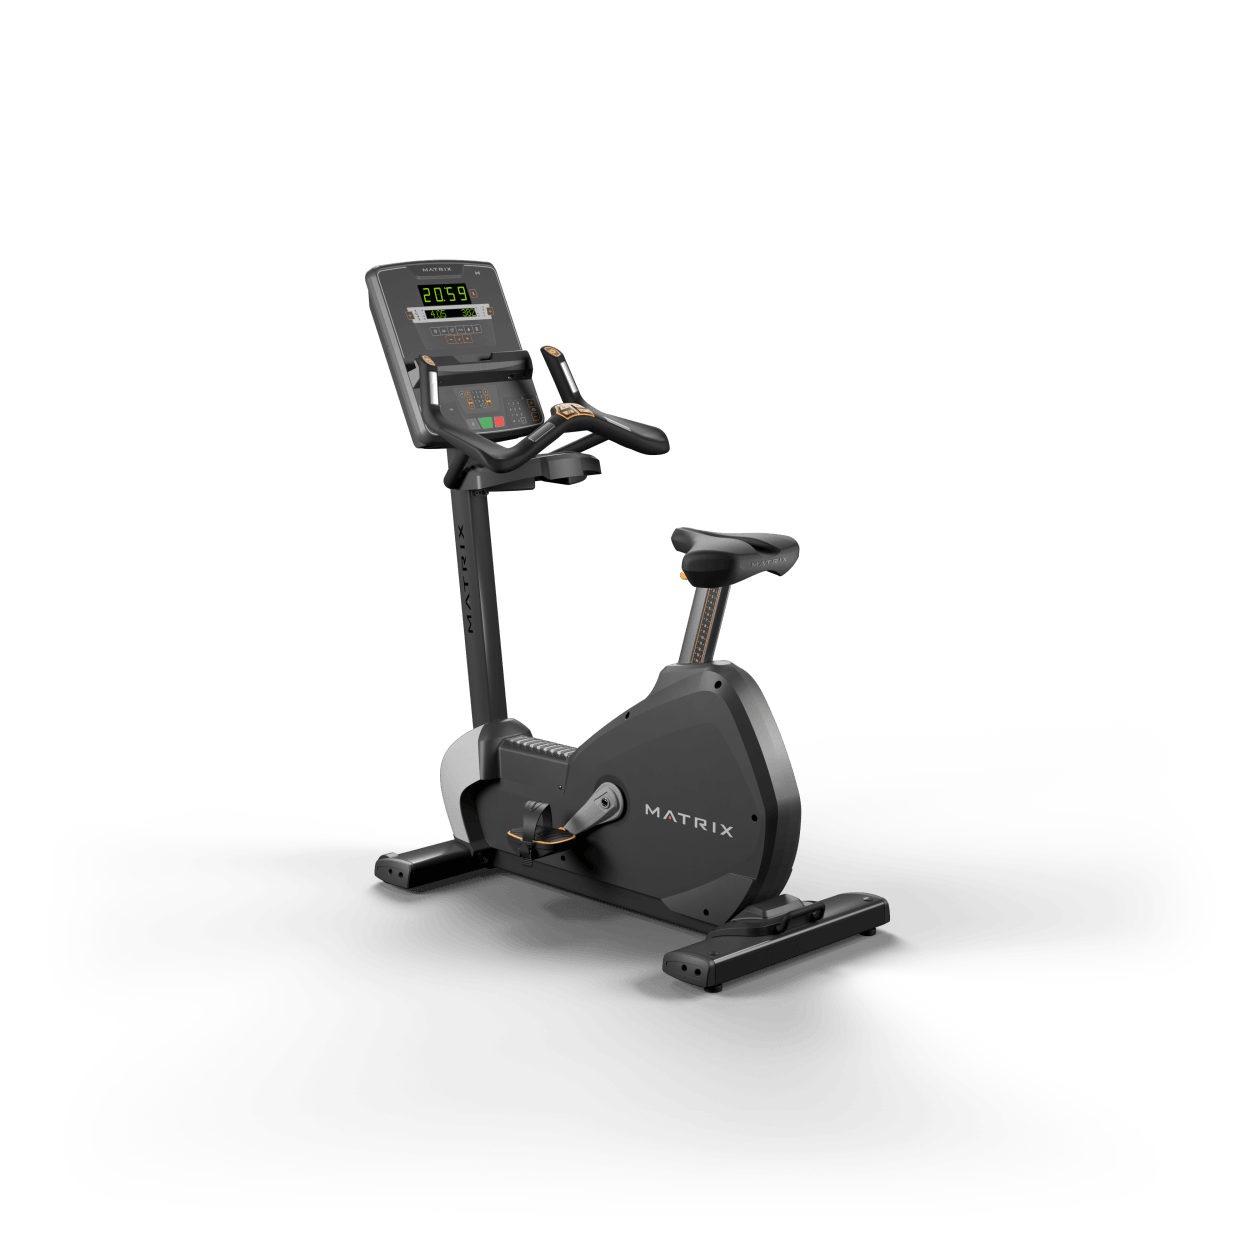 Matrix Fitness Performance Upright with LED Console full view | Fitness Experience